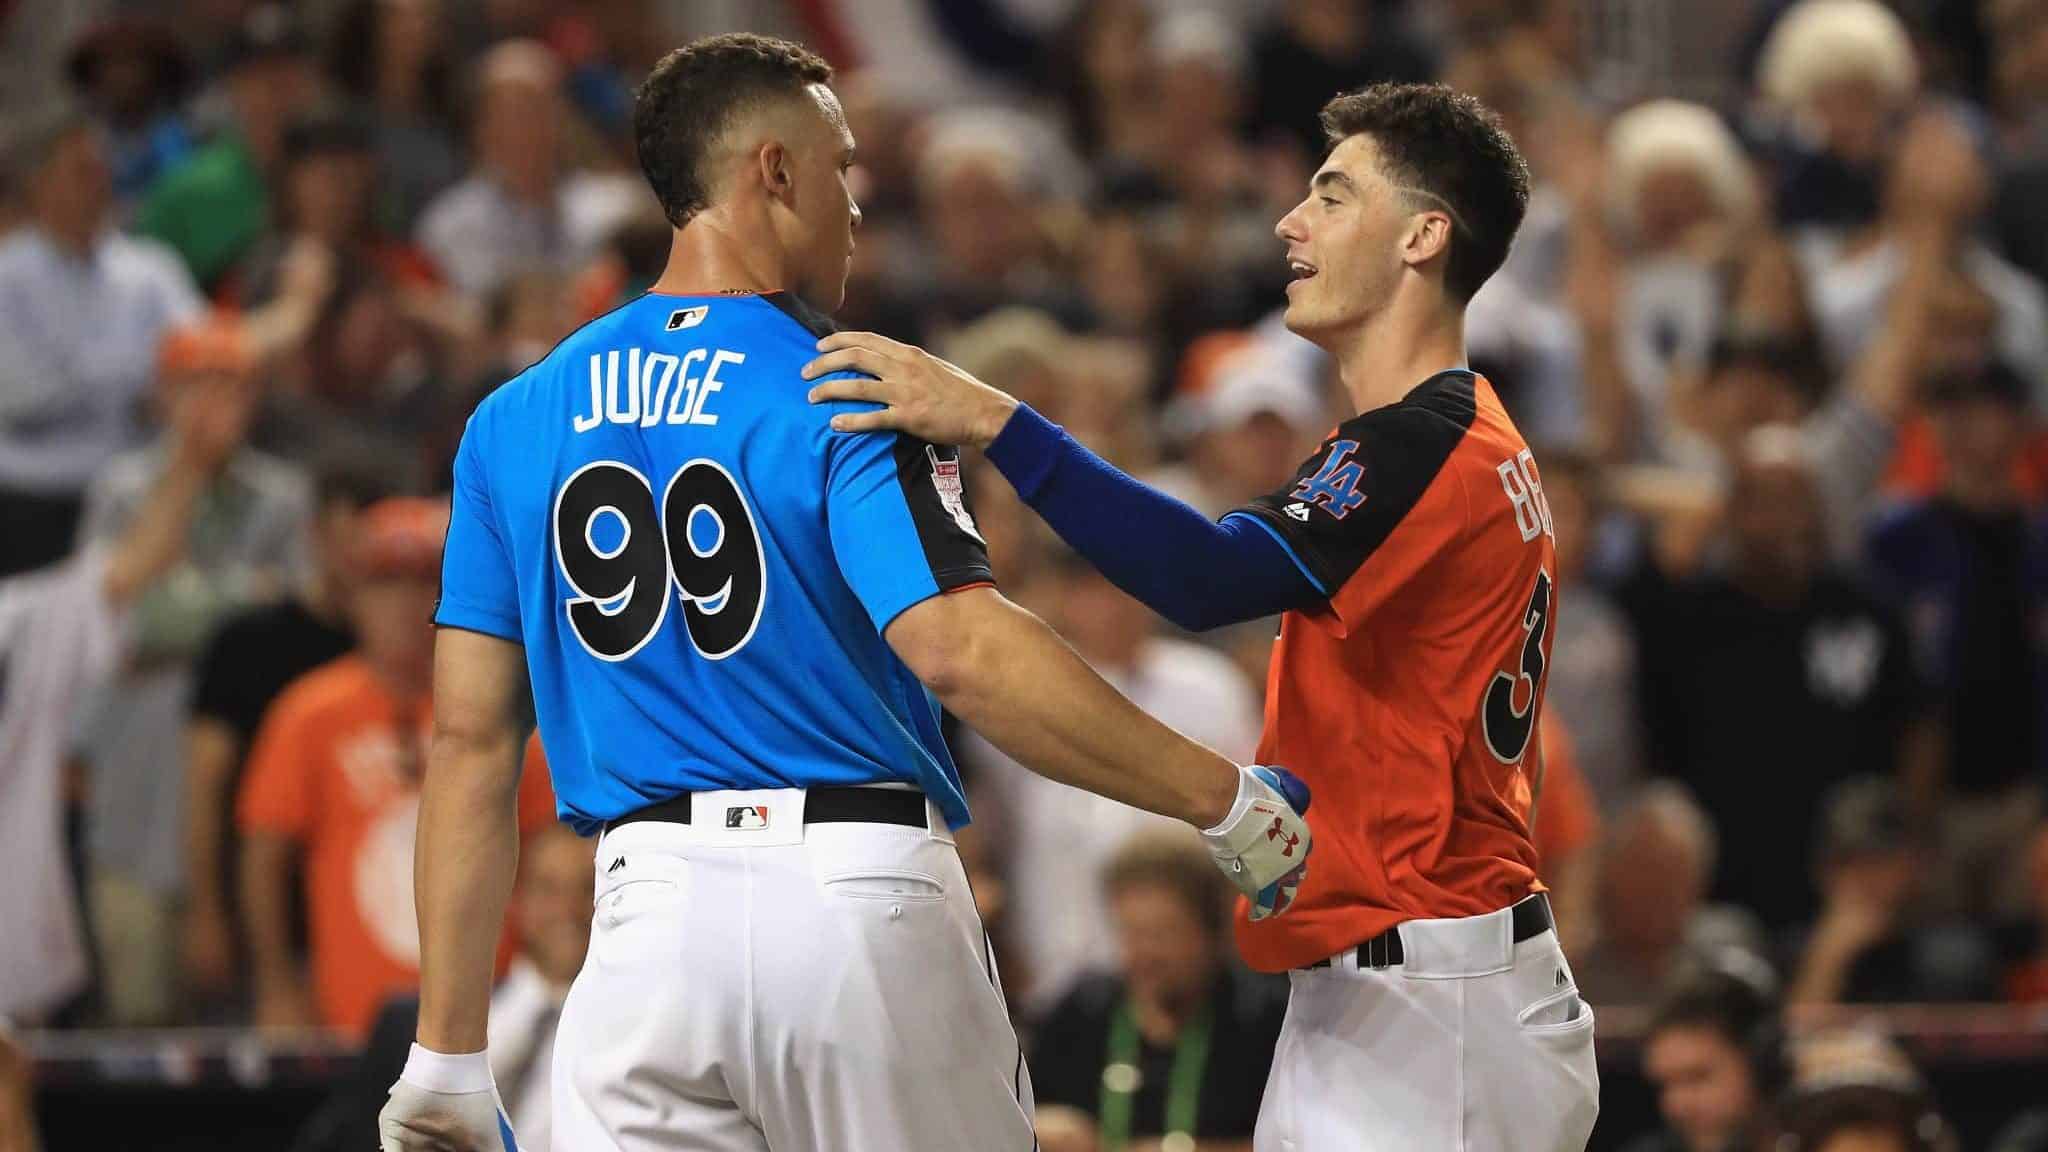 MIAMI, FL - JULY 10: Aaron Judge #99 of the New York Yankees hugs Cody Bellinger #35 of the Los Angeles Dodgers and the National League during the T-Mobile Home Run Derby at Marlins Park on July 10, 2017 in Miami, Florida.